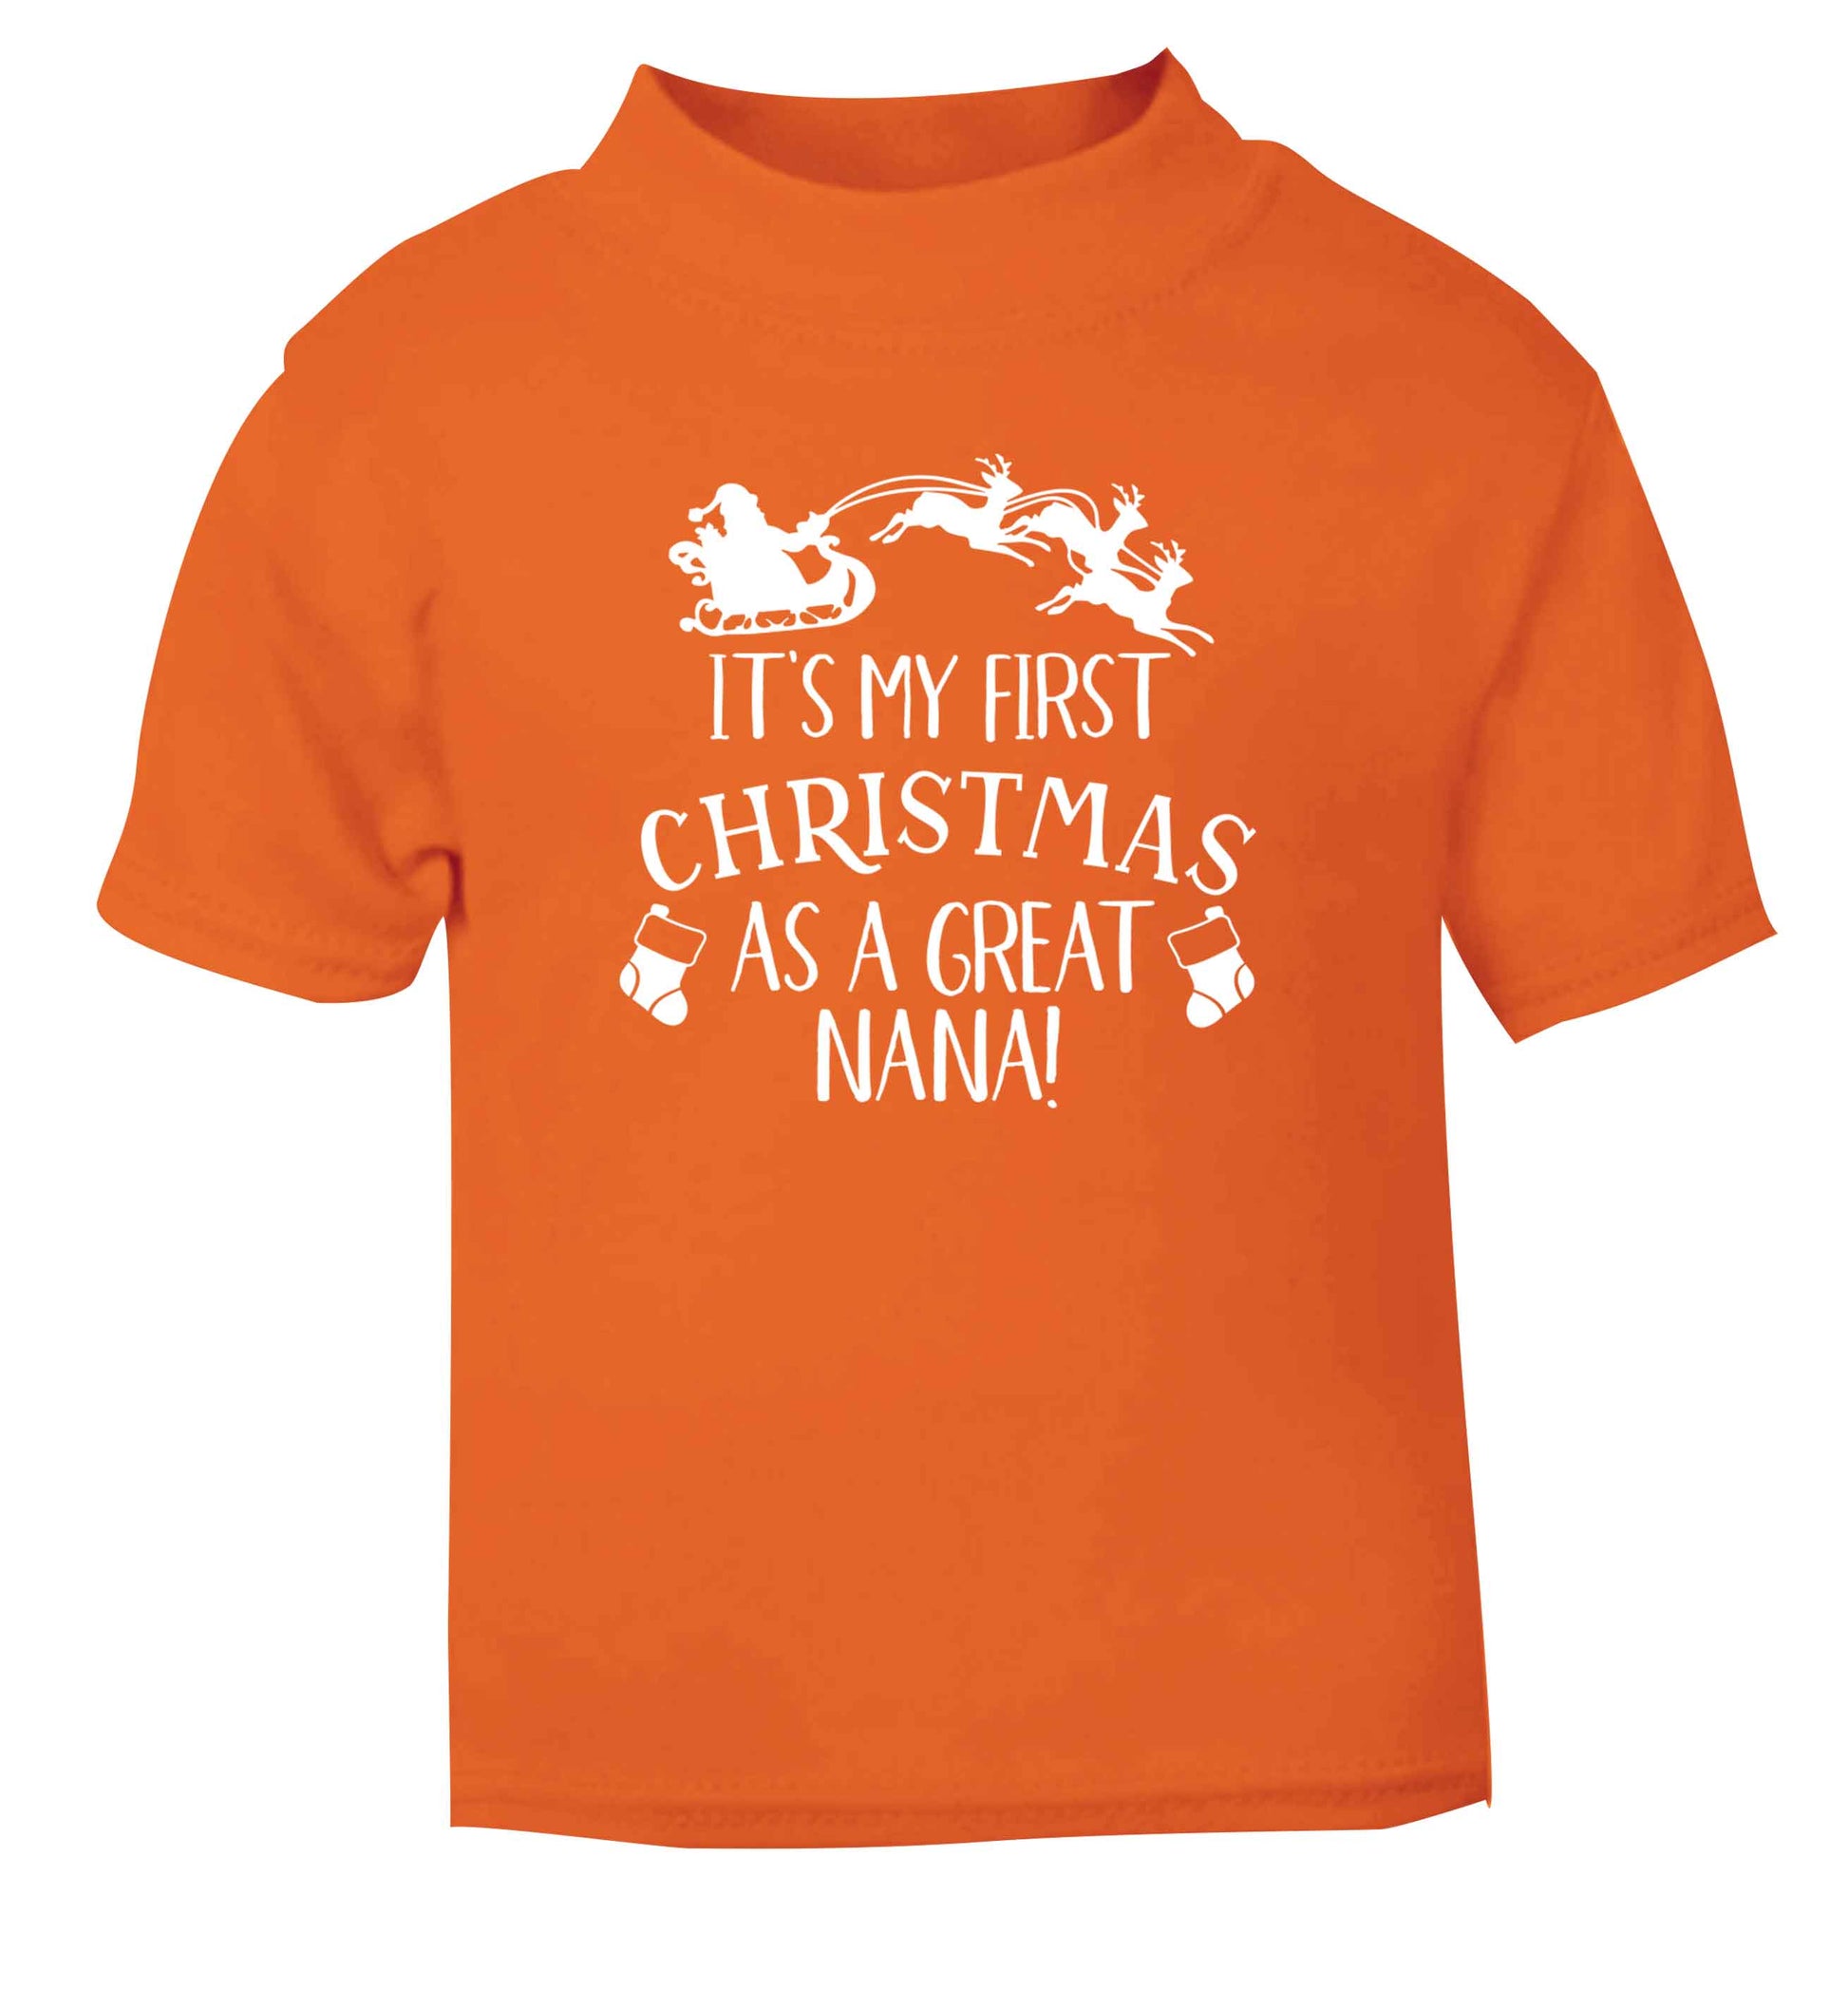 It's my first Christmas as a great nana! orange Baby Toddler Tshirt 2 Years